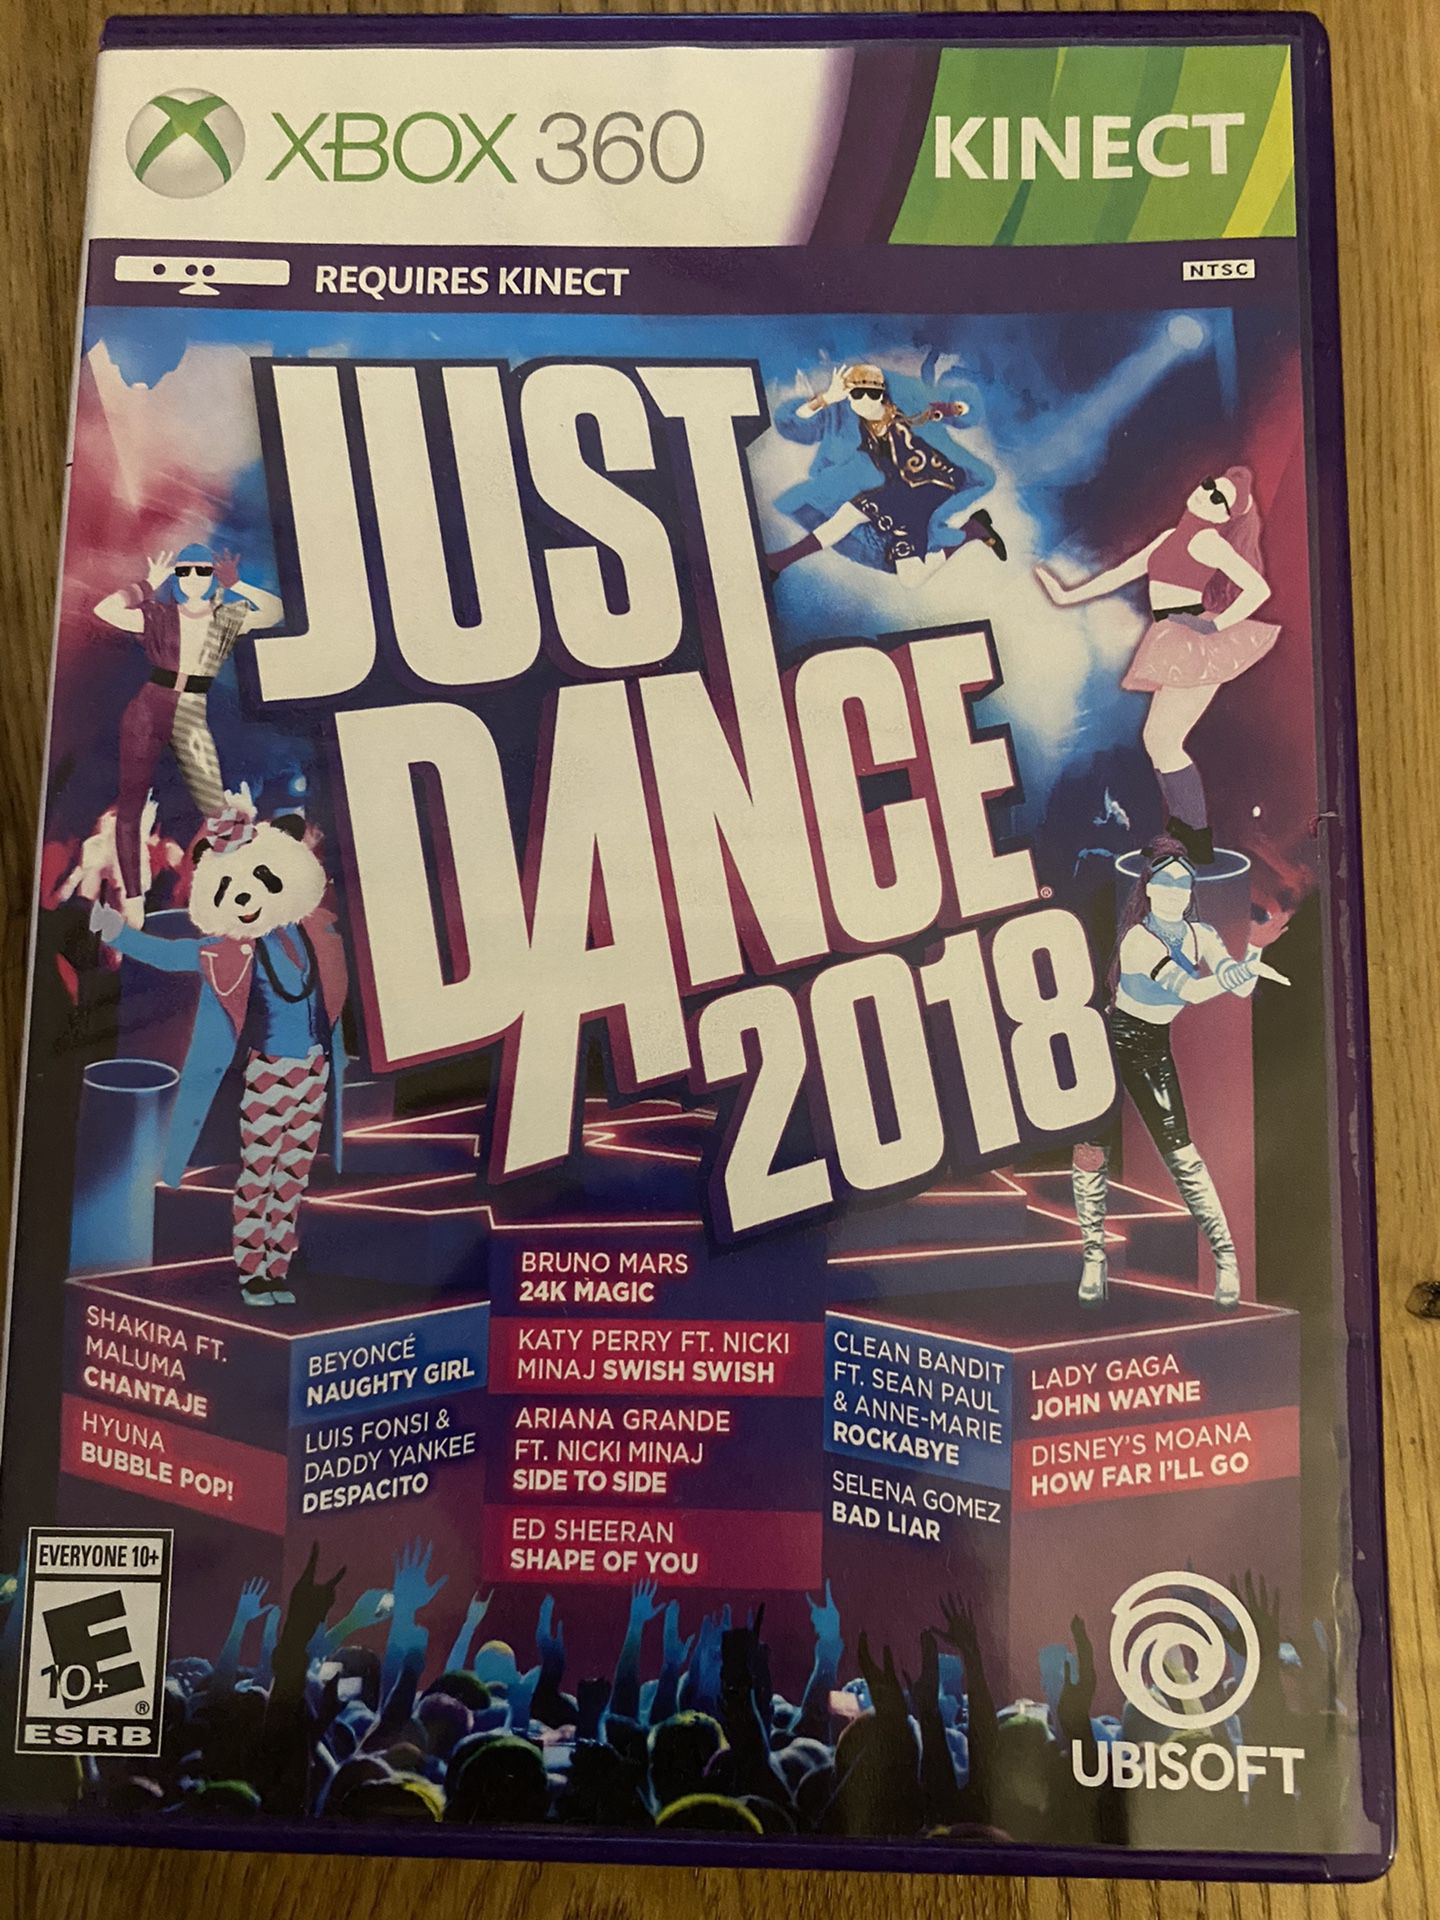 XBOX 360 Just Dance 2018 game